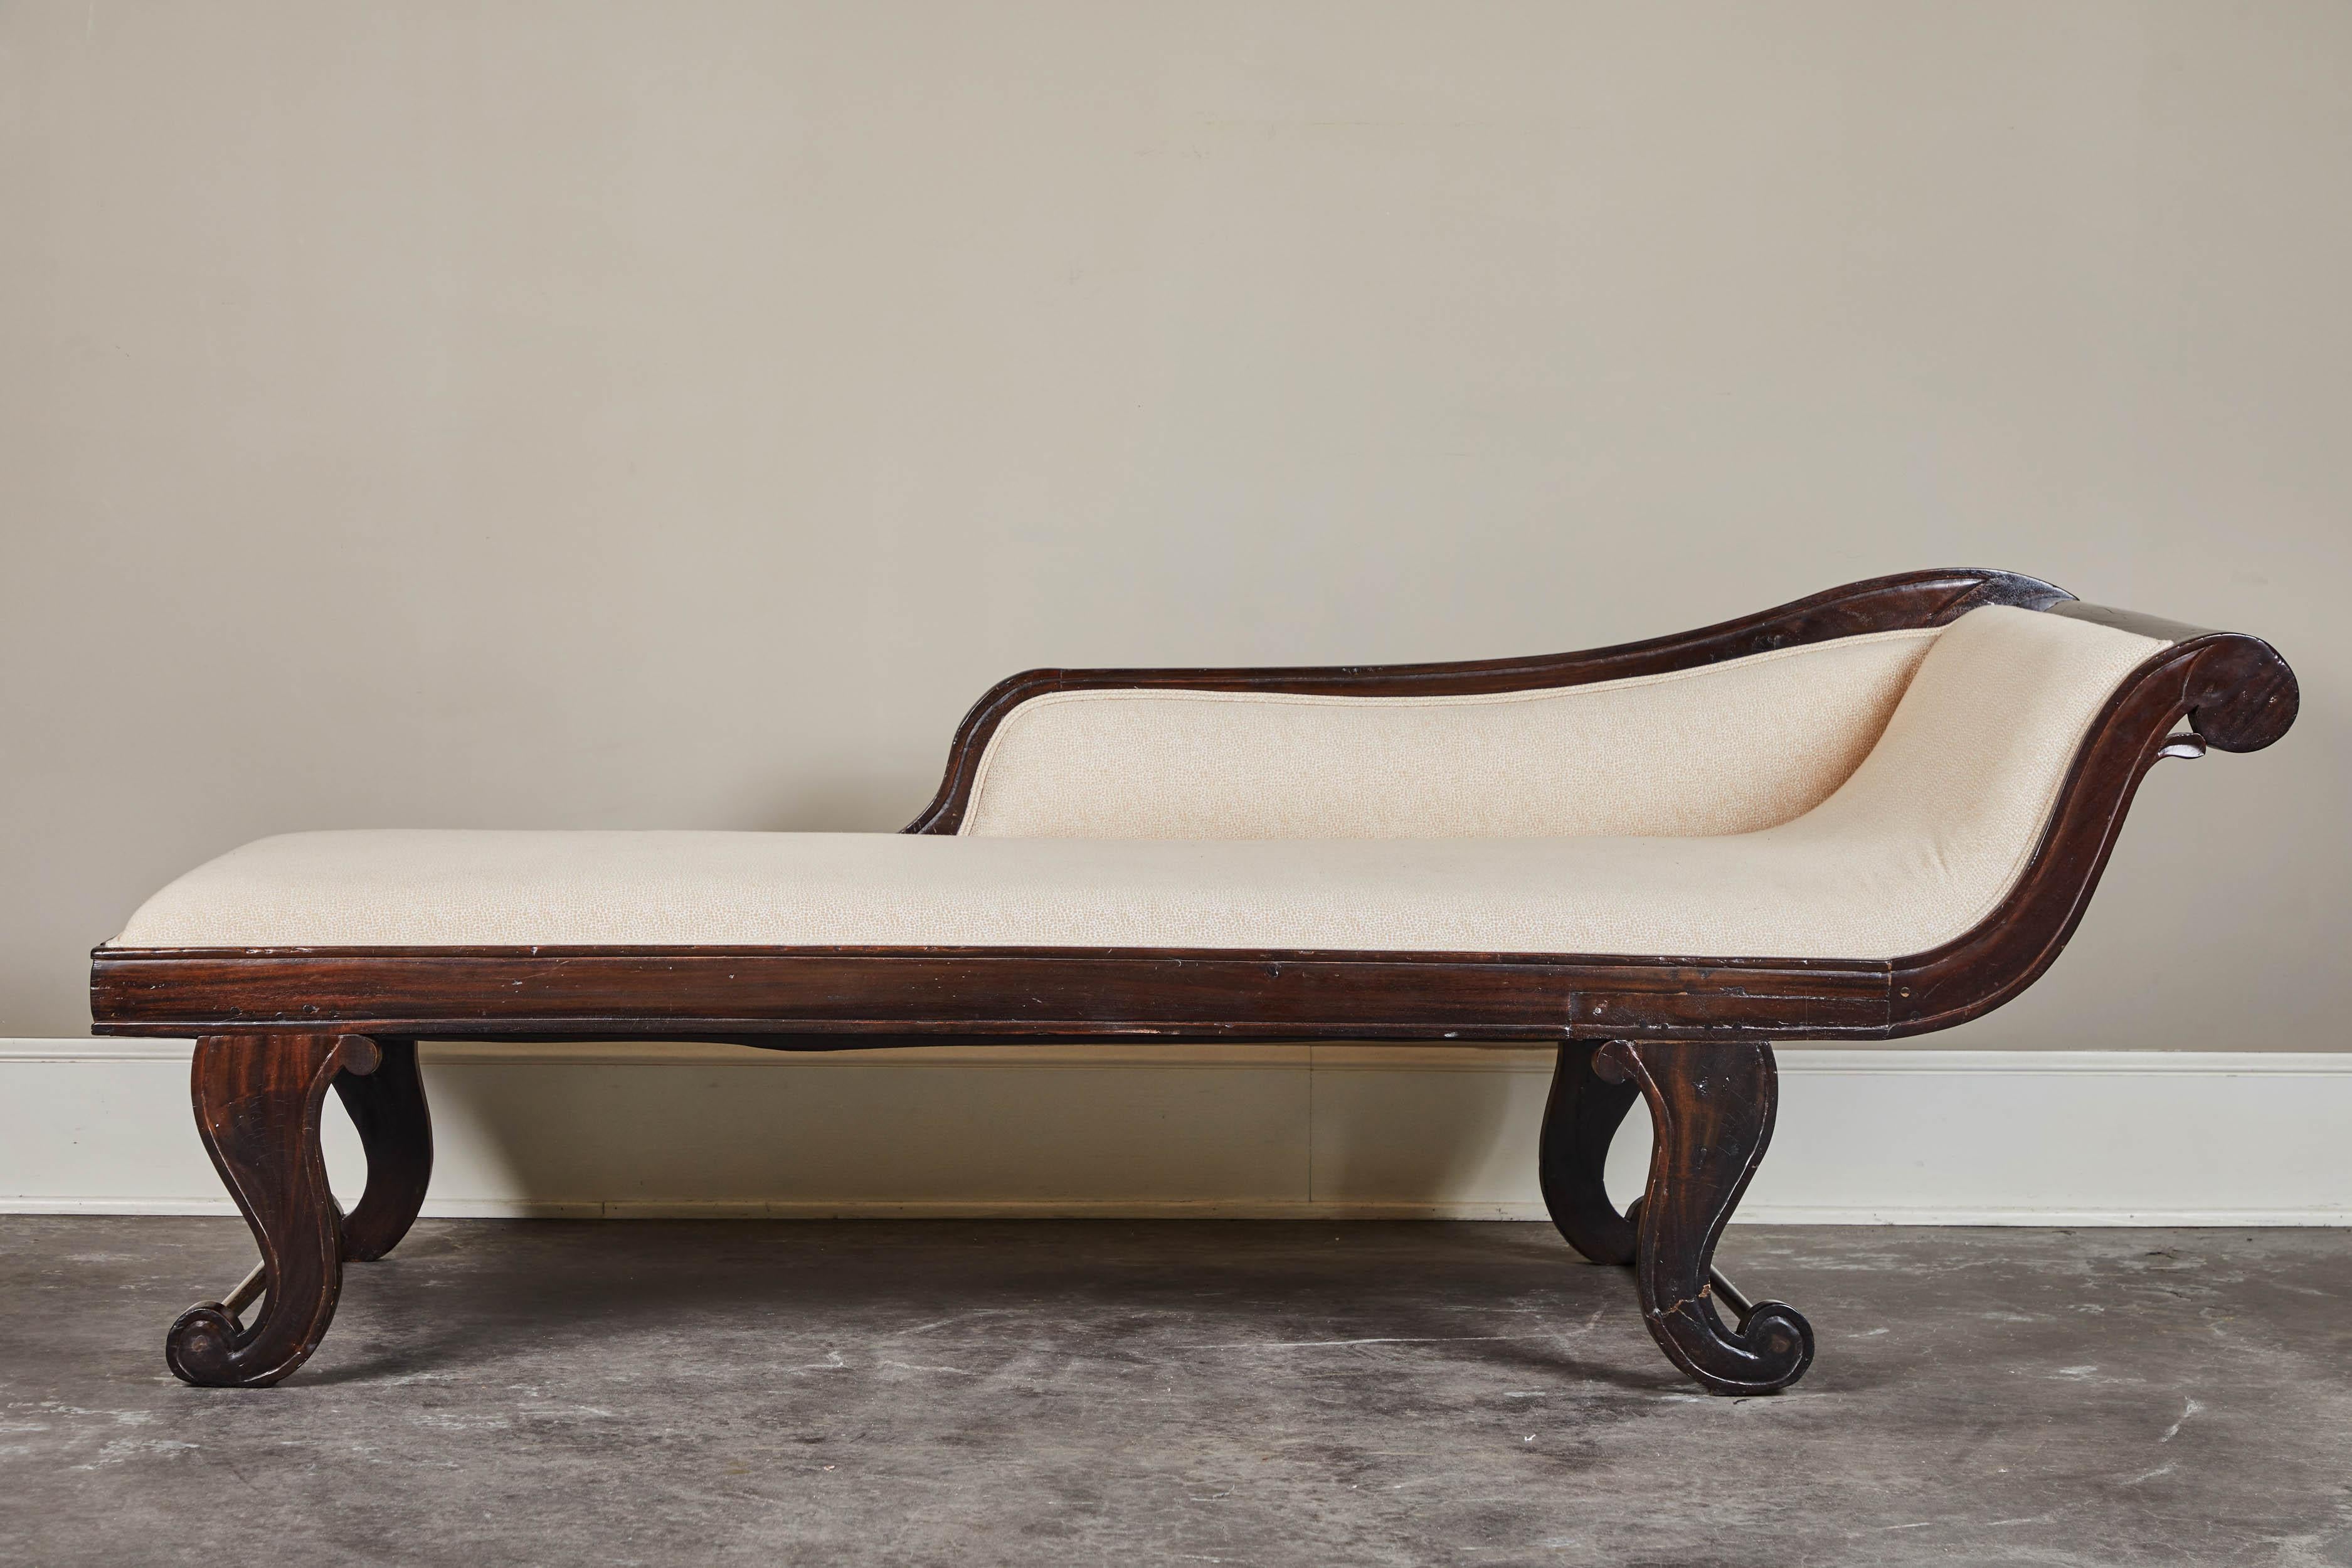 A lovely 19th century British Colonial chaise comprised of Jakwood and new upholstery.